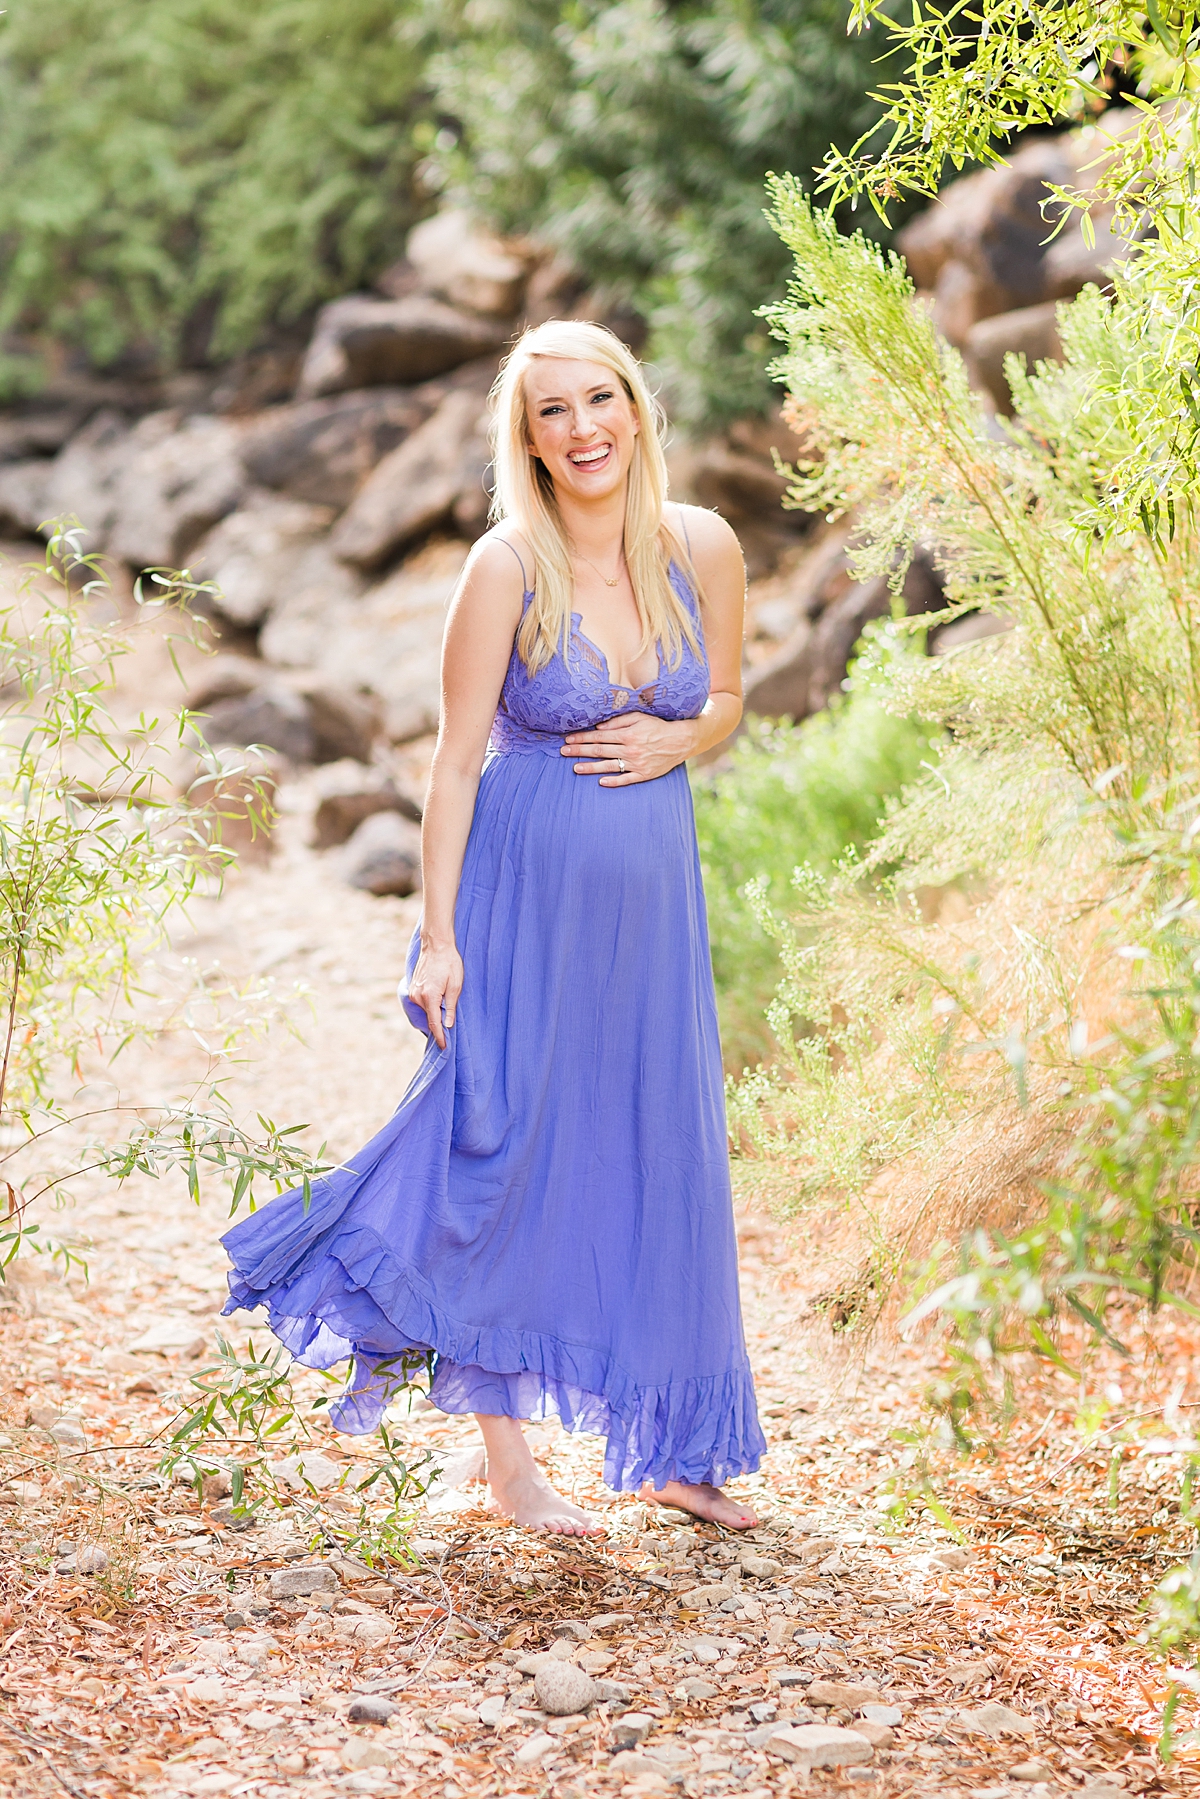 Leah Hope Photography | Scottsdale Arizona Maternity Photographer | Phoenix Arizona Pregnancy Pictures | Natural Light Photography | What to Wear | How to Pose | Maternity Poses | Styling Fashion for Pictures | Maternity Photos | Maternity Posing Ideas | Pregnancy Photo Shoot Outfit Inspiration | Outfits and Styling Ideas | Maternity Poses | Maternity Photos | Bump Pictures | Baby Bump